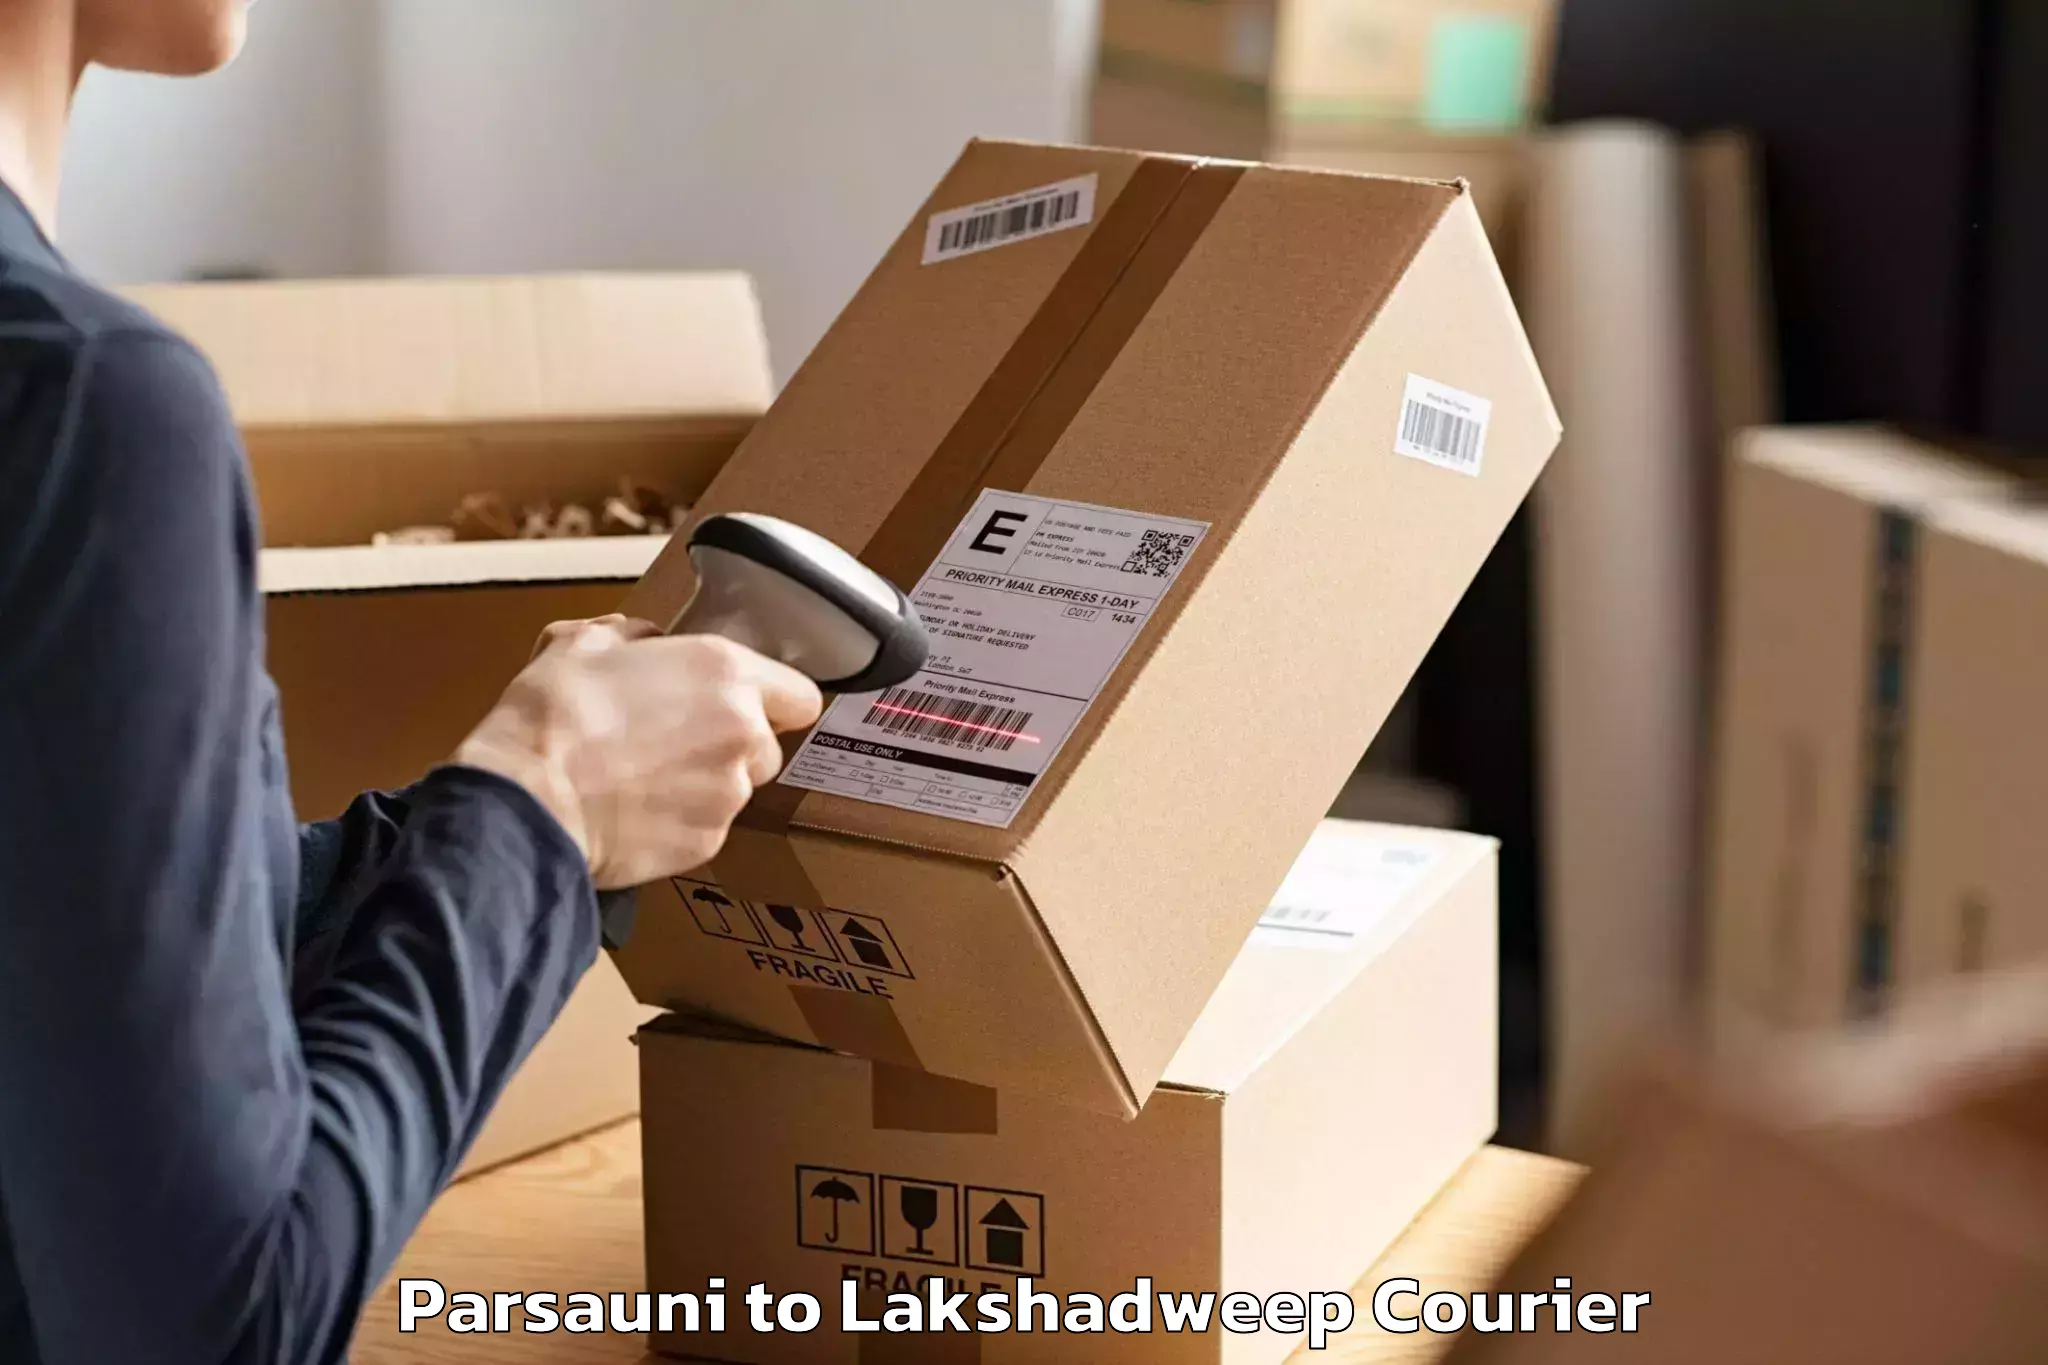 Professional furniture movers in Parsauni to Lakshadweep